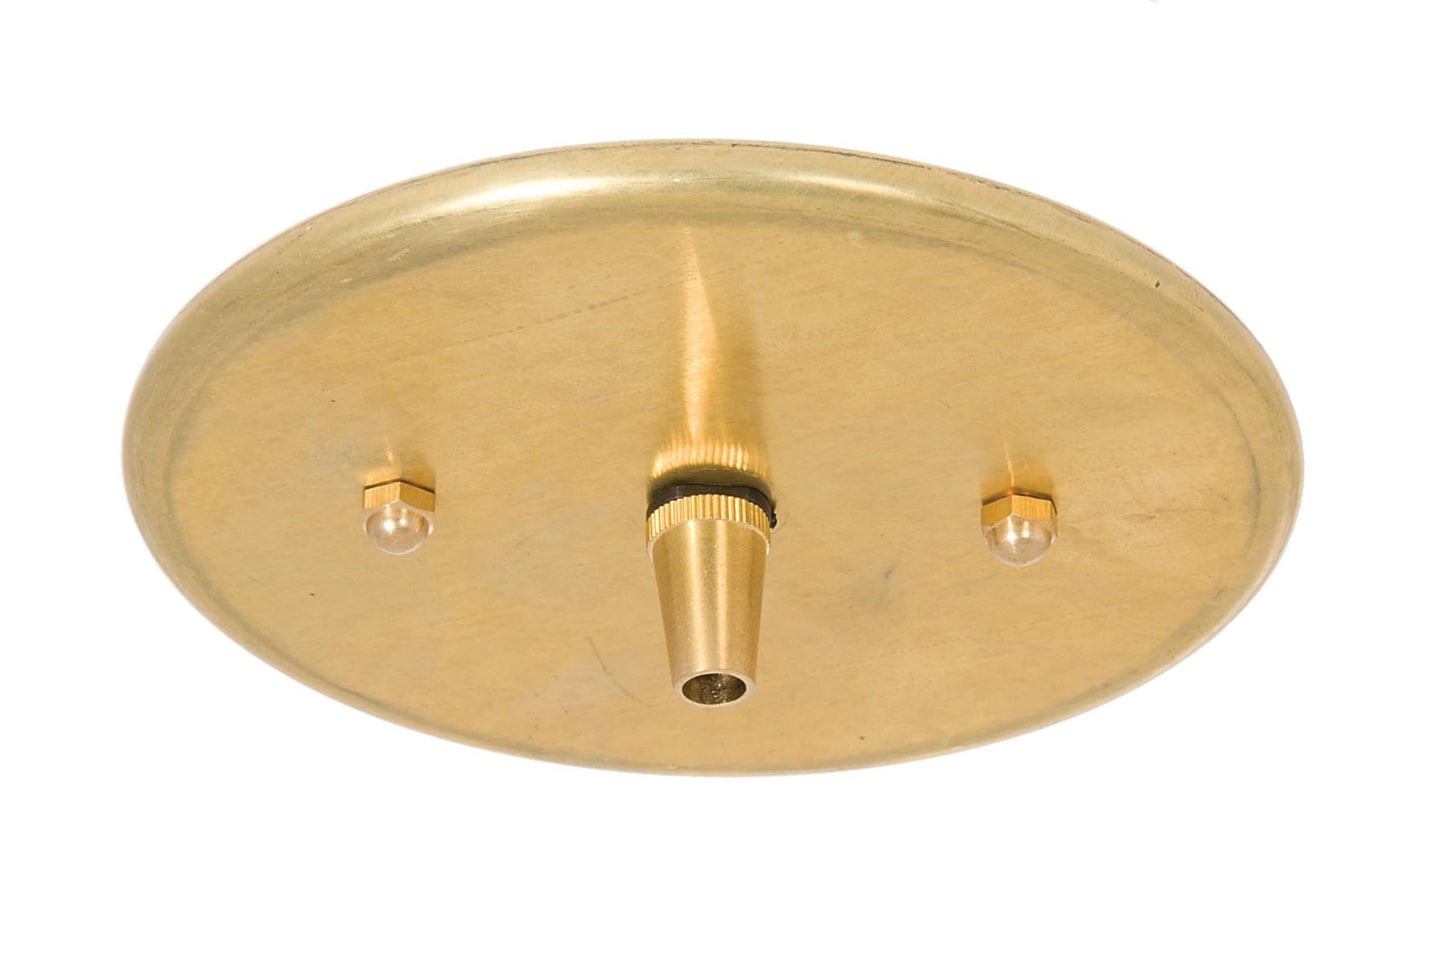 5-1/4 Inch Diameter Versatile Flat Radial Edge Brass Ceiling Canopy with Mounting Hardware Kit